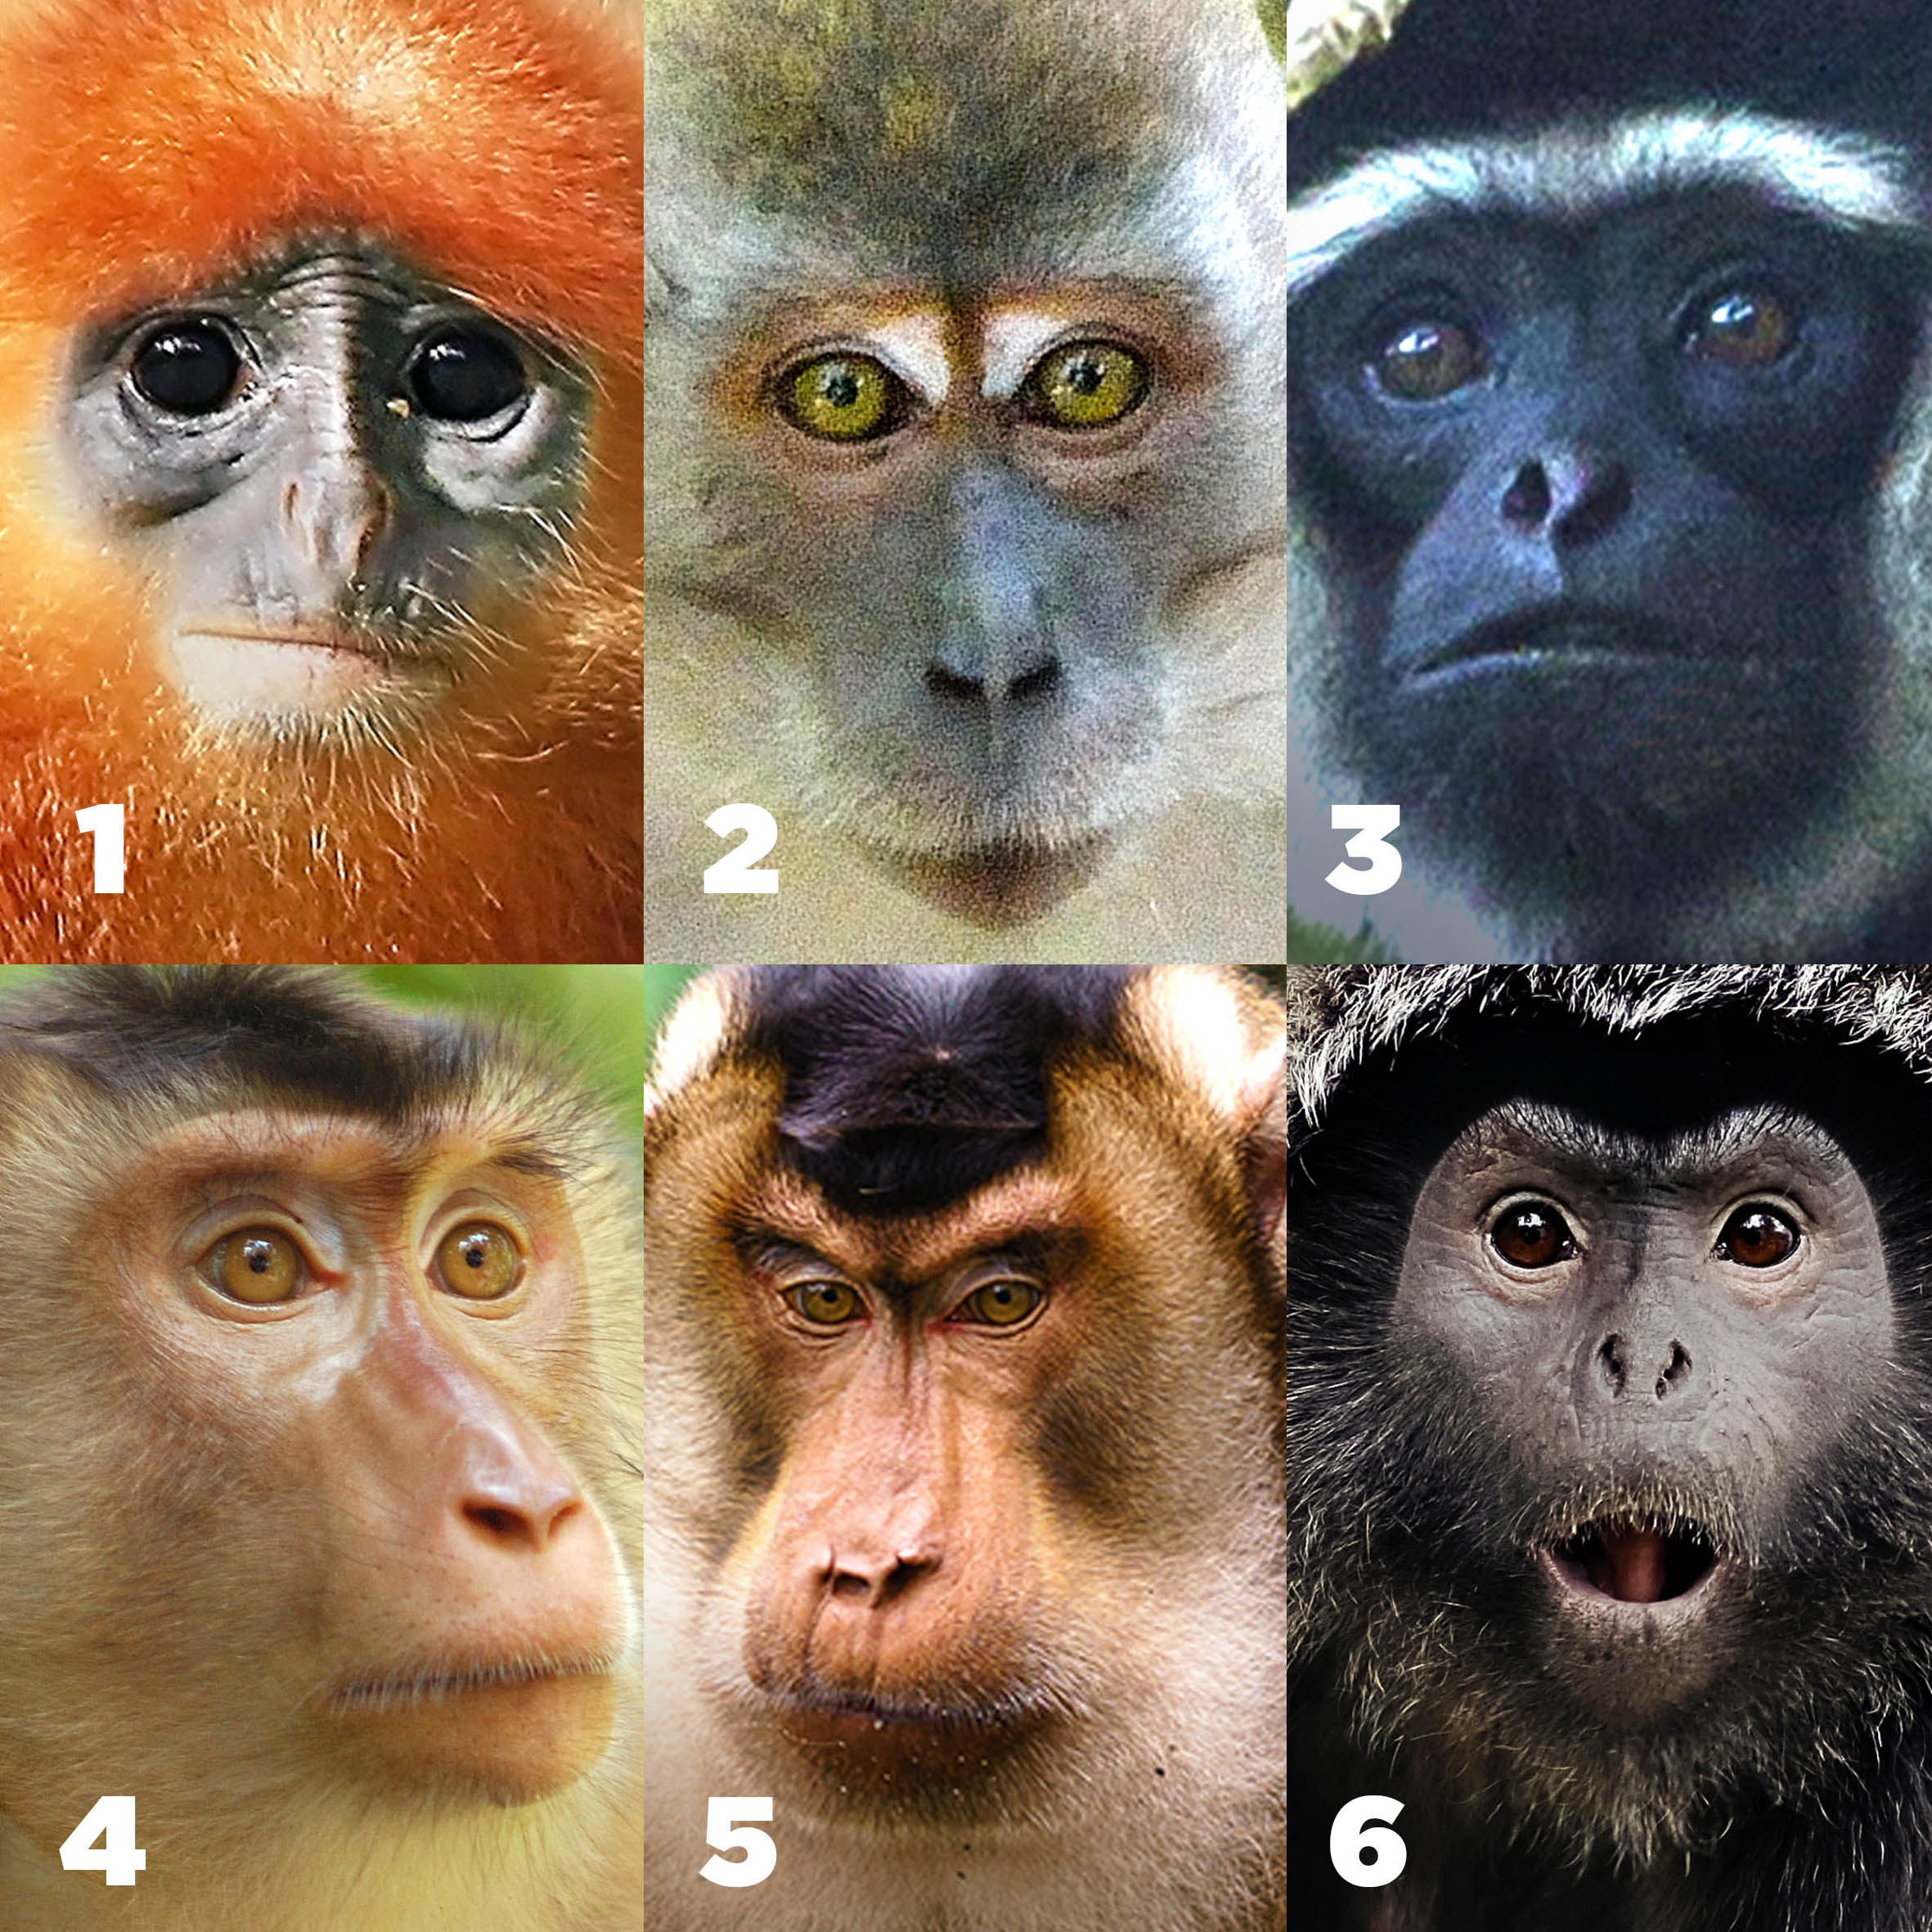 5 Main Differences Between Apes vs Monkeys